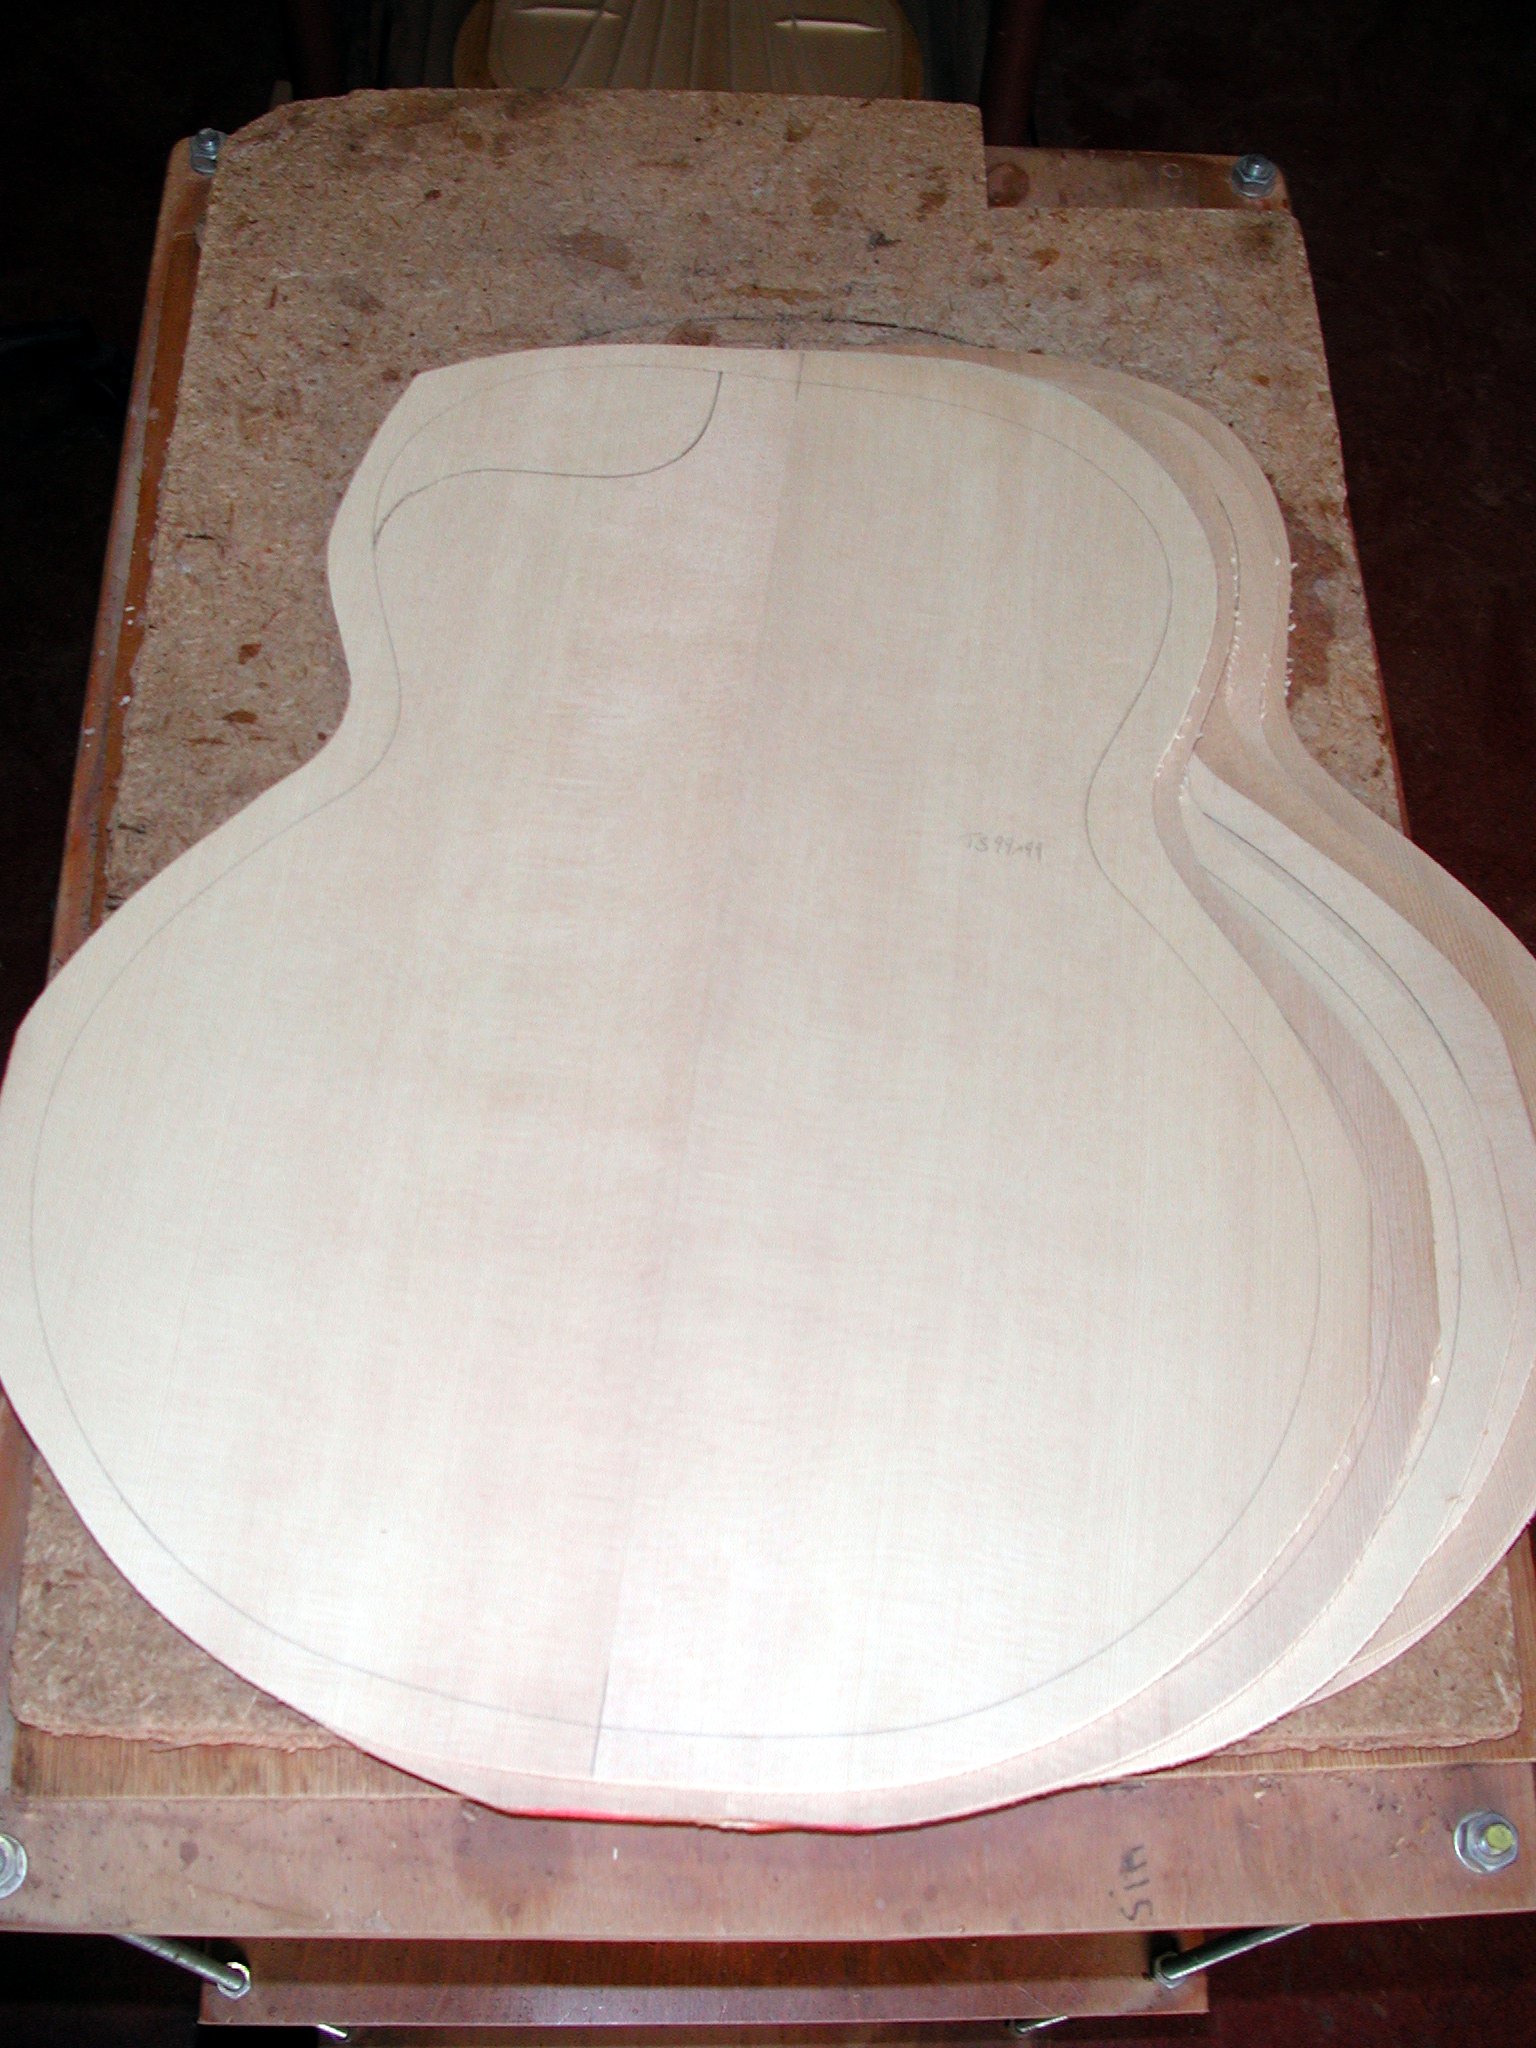 Top: The Sitka tops are cut into a rough shape...